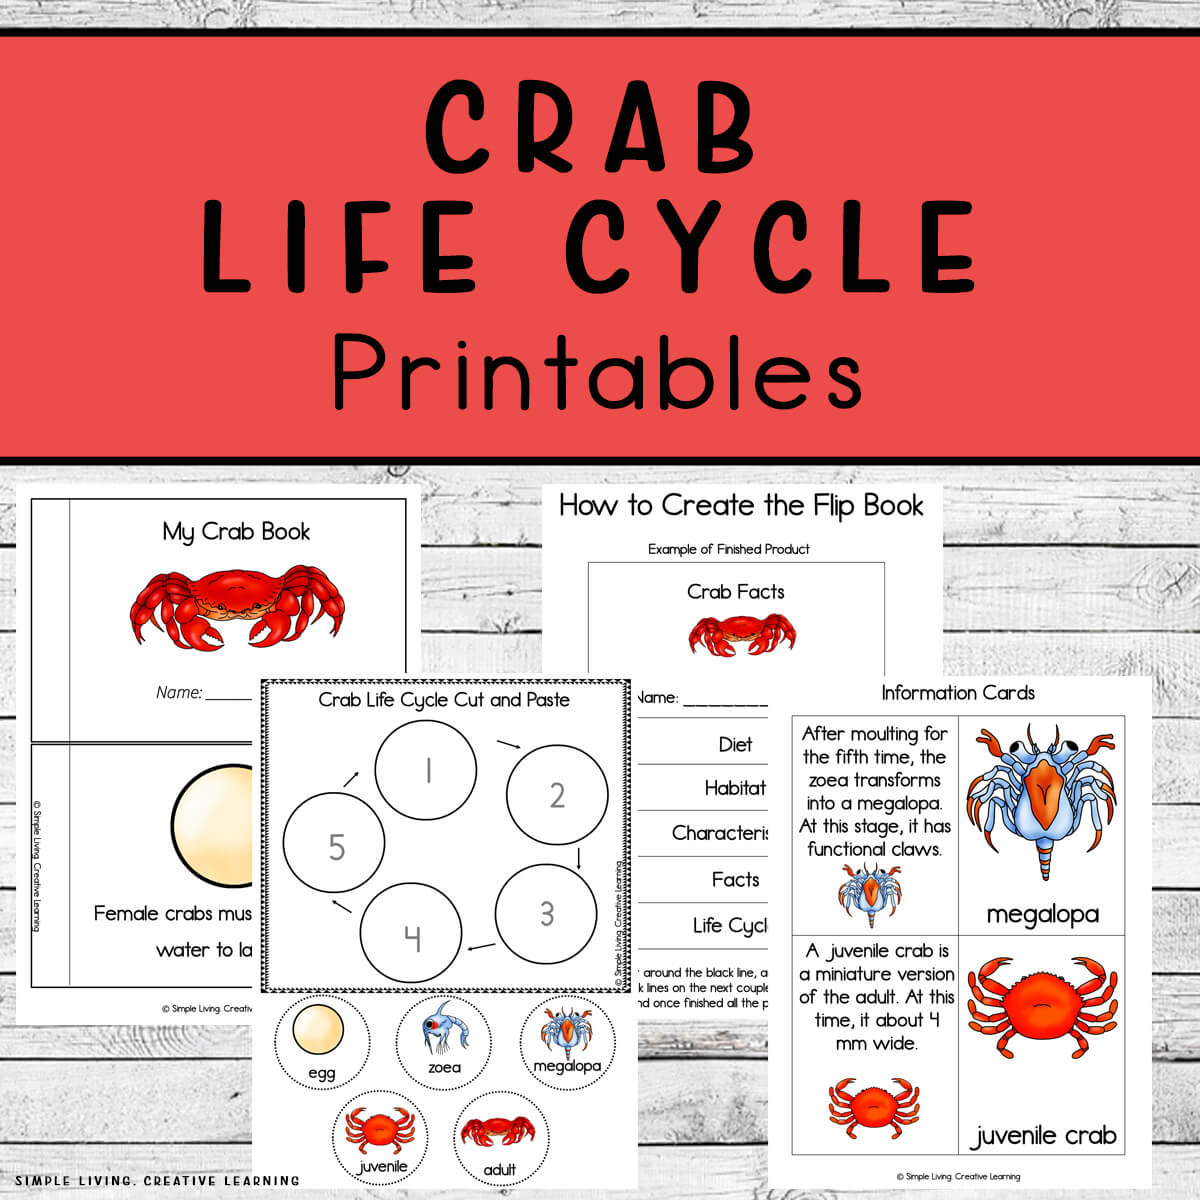 Crab Life Cycle Printables four pages